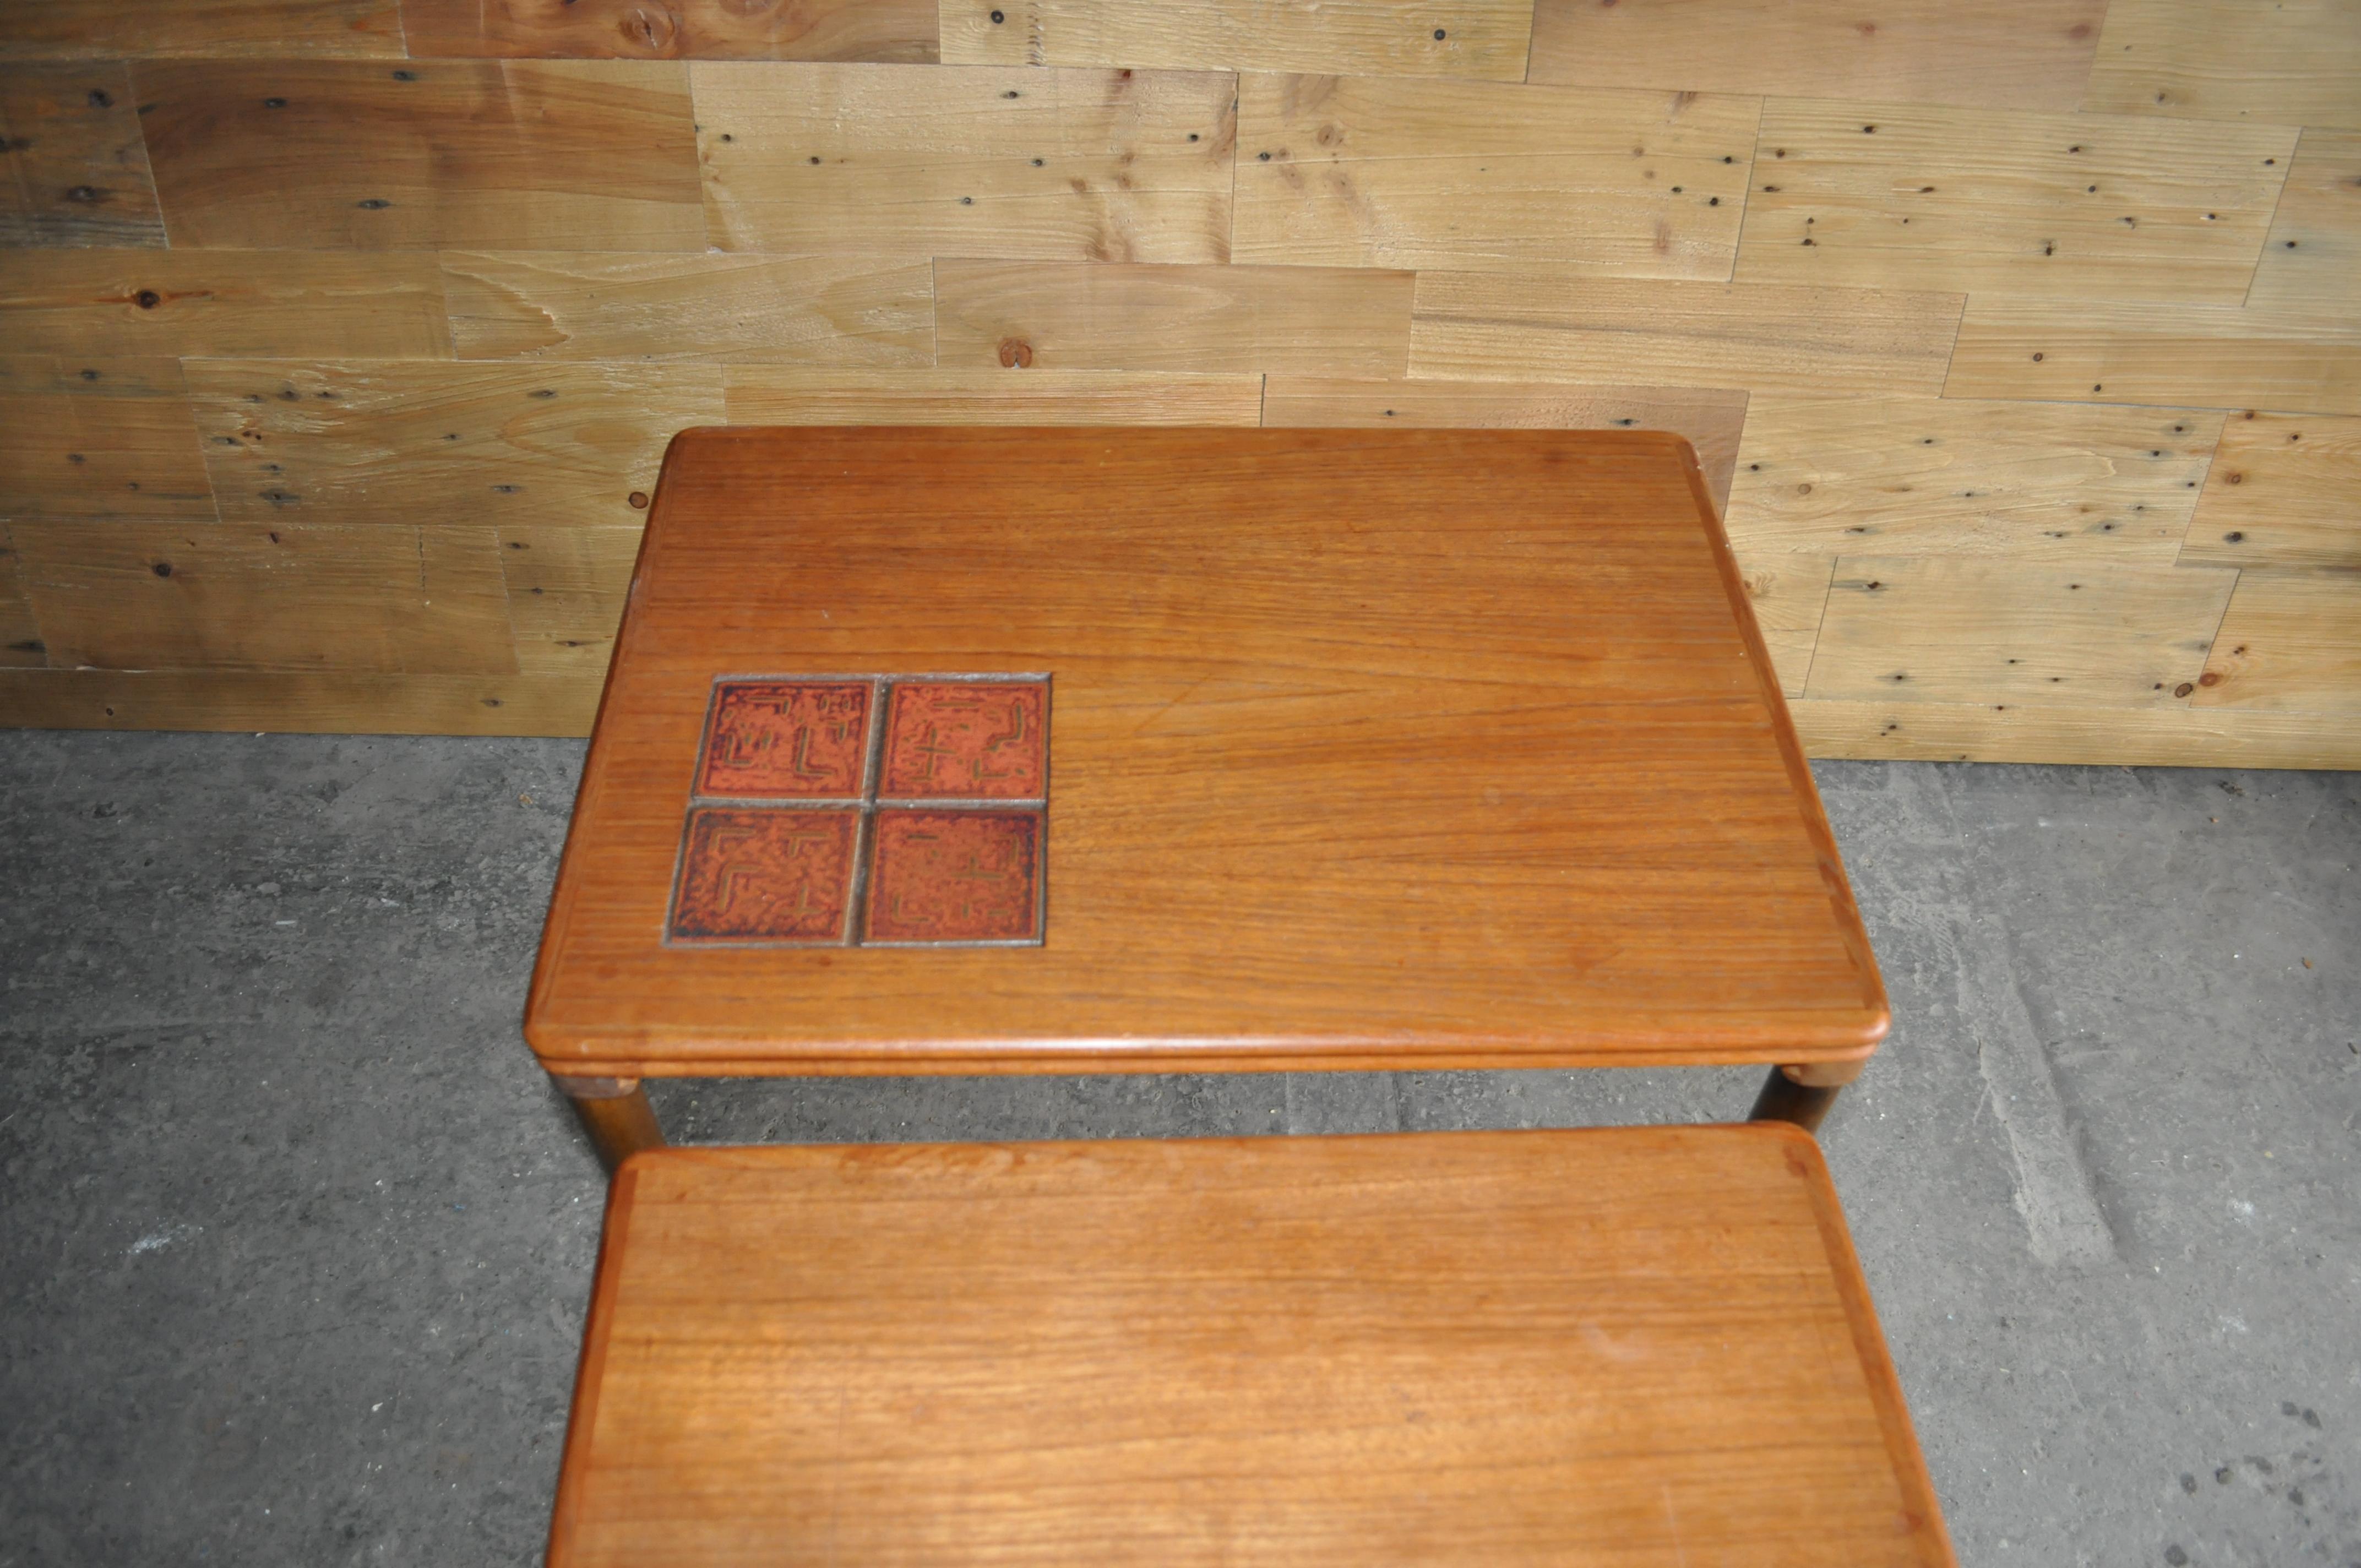 Mobler nest with German tile.
A lovely nest of 1960s Danish coffee tables. With beautiful teak veneer and a single tile in the top table.
Size: 55 x 40 x 50
47 x 40 x 47
40 x 40 x 45.